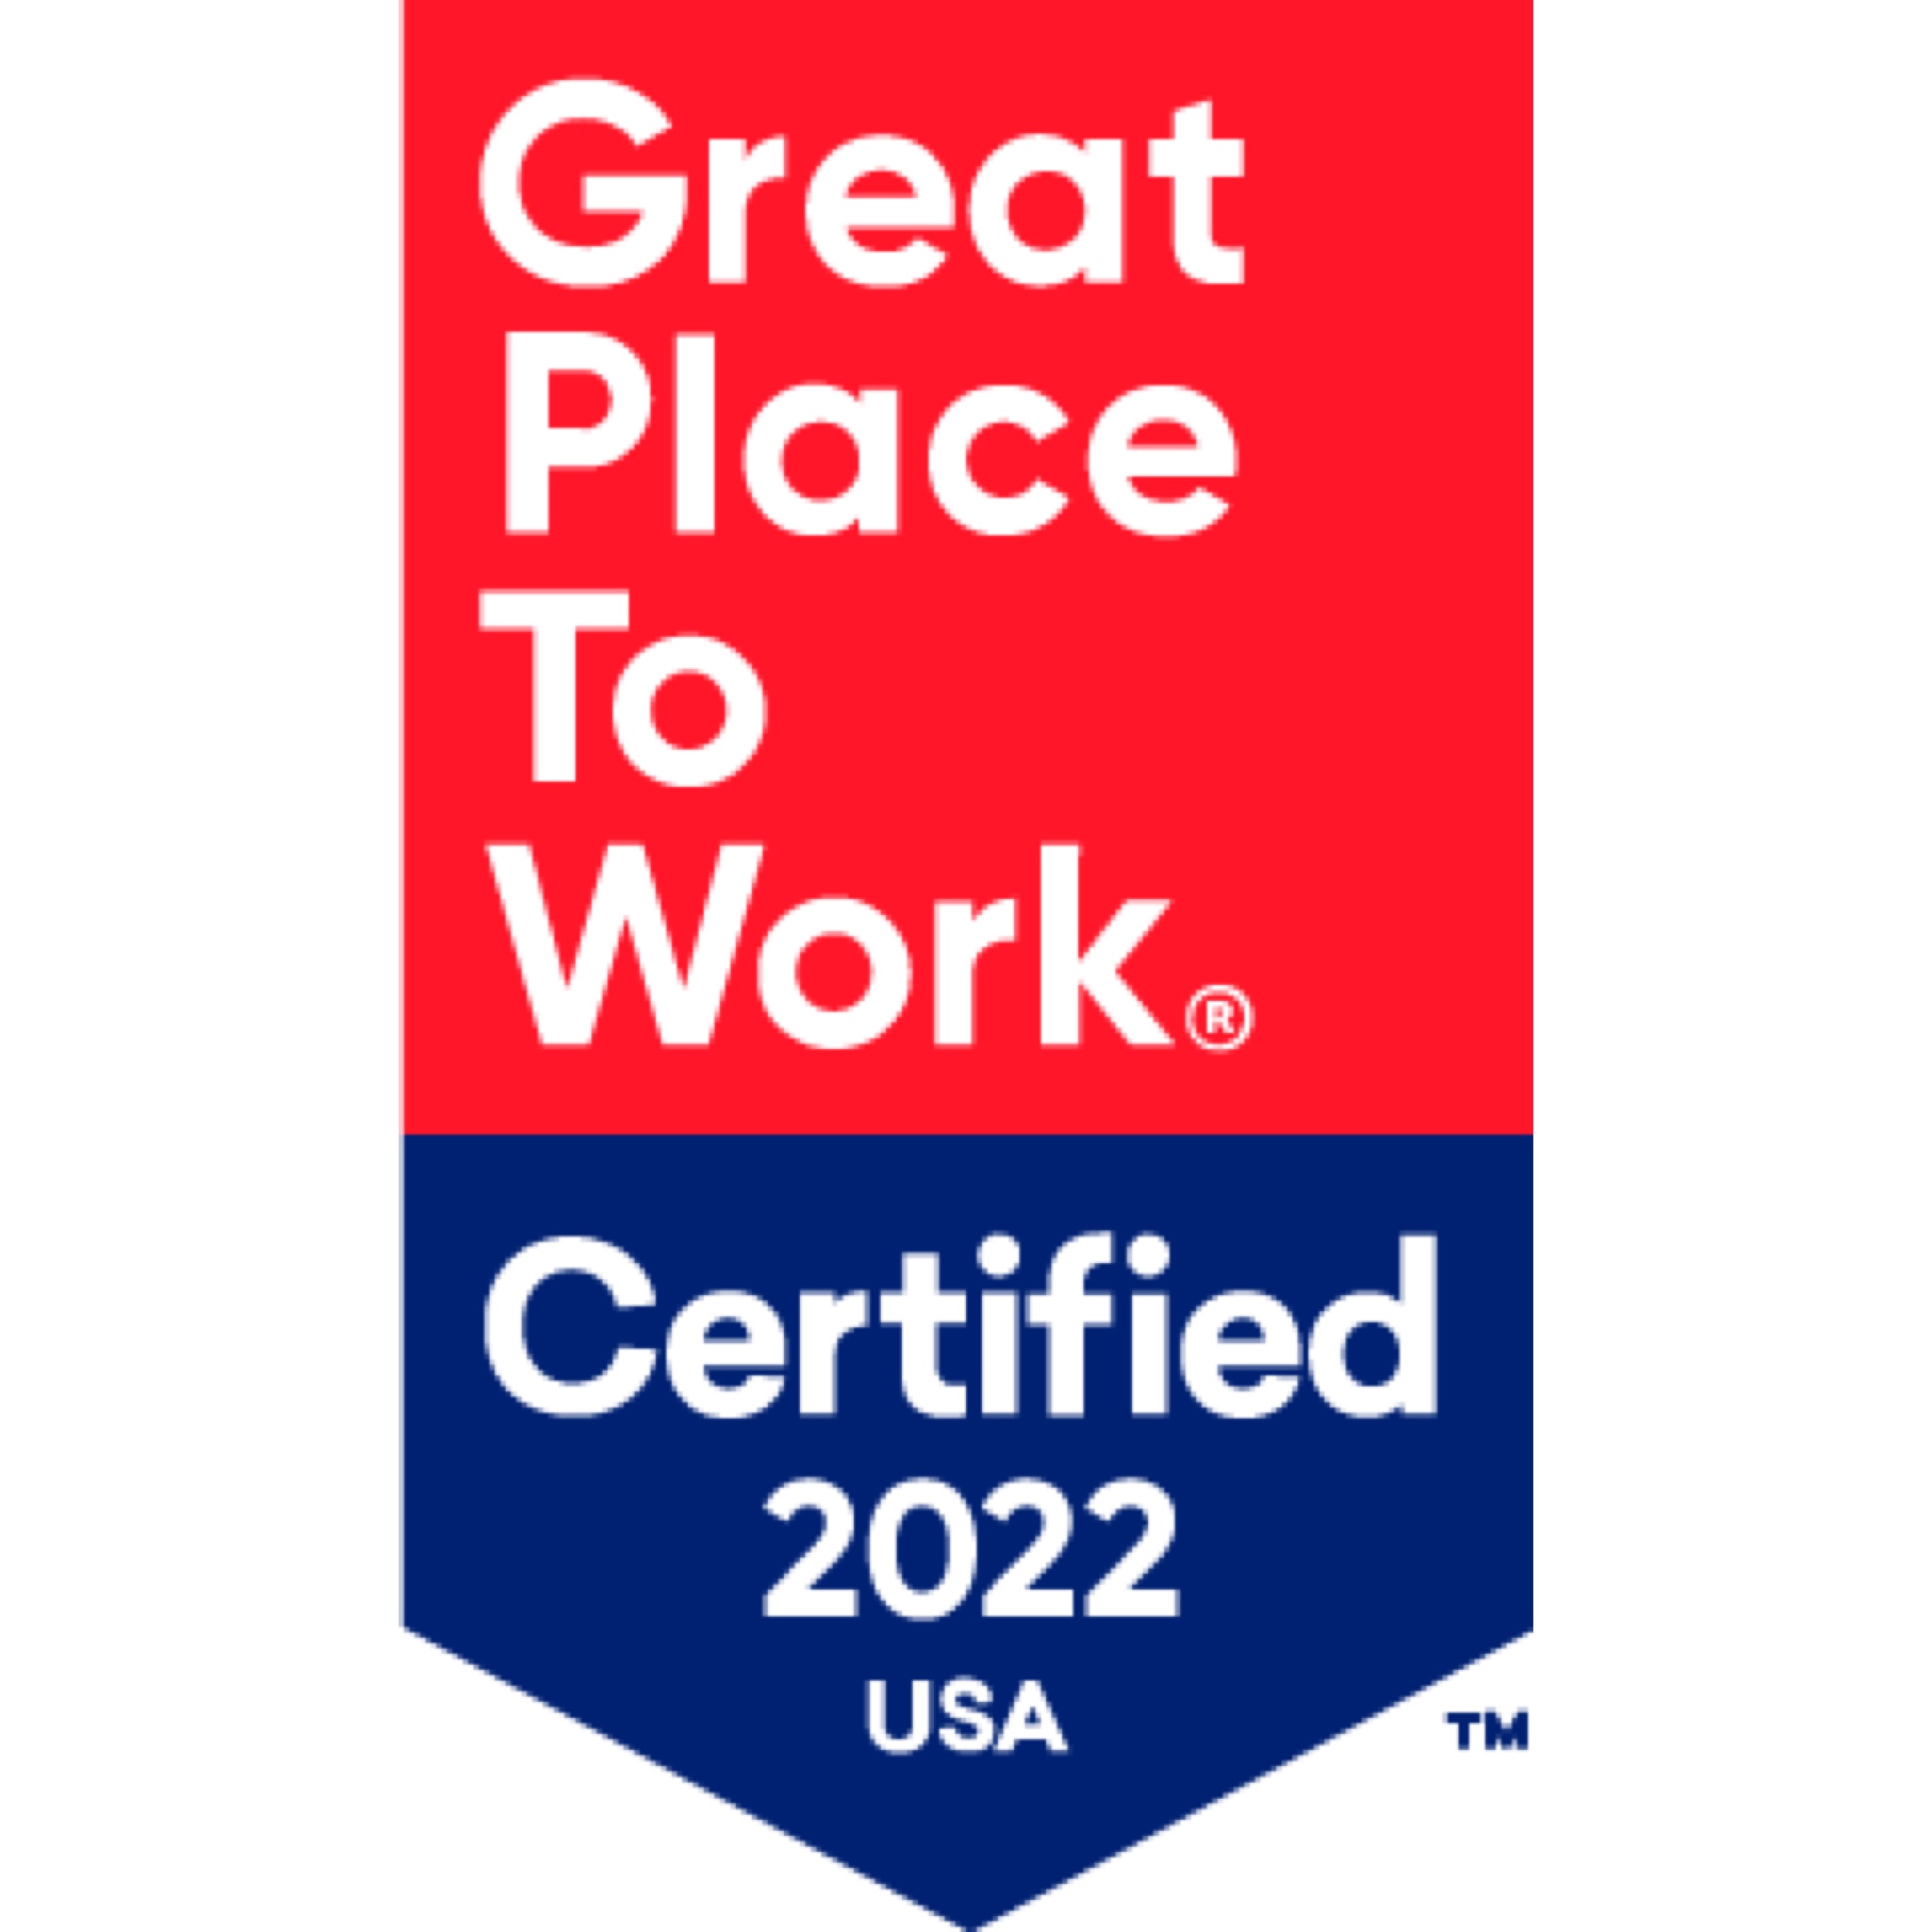 L'agenzia Altered State Productions di United States ha vinto il riconoscimento Great Places to Work - Certified 2022 USA